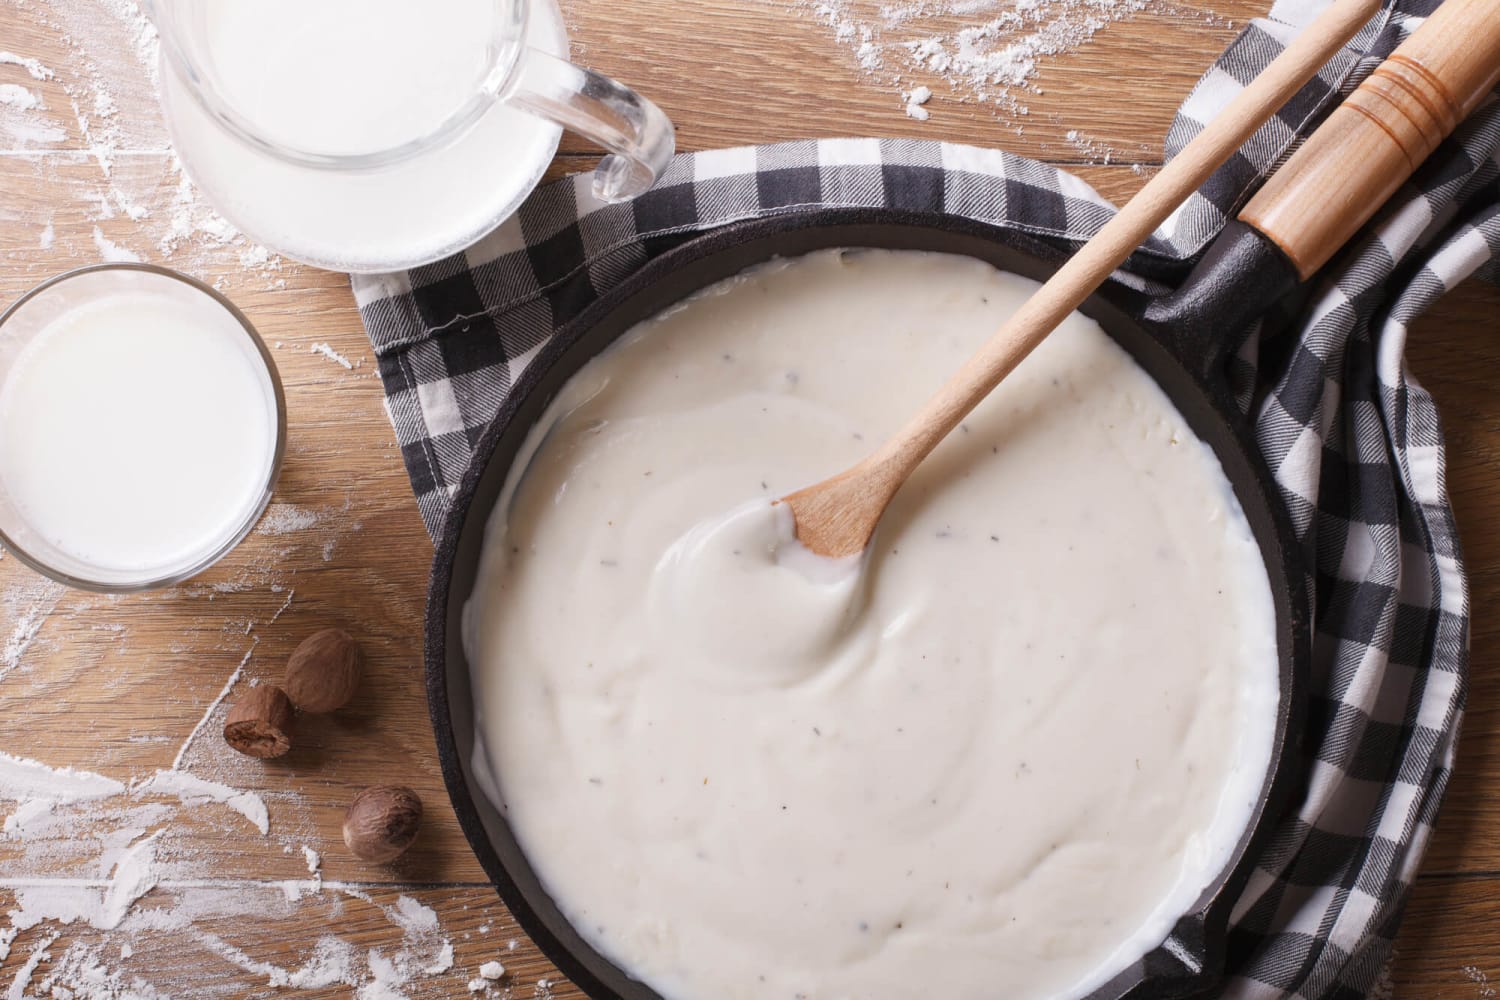 https://www.acouplefortheroad.com/how-to-make-a-great-bechamel-sauce